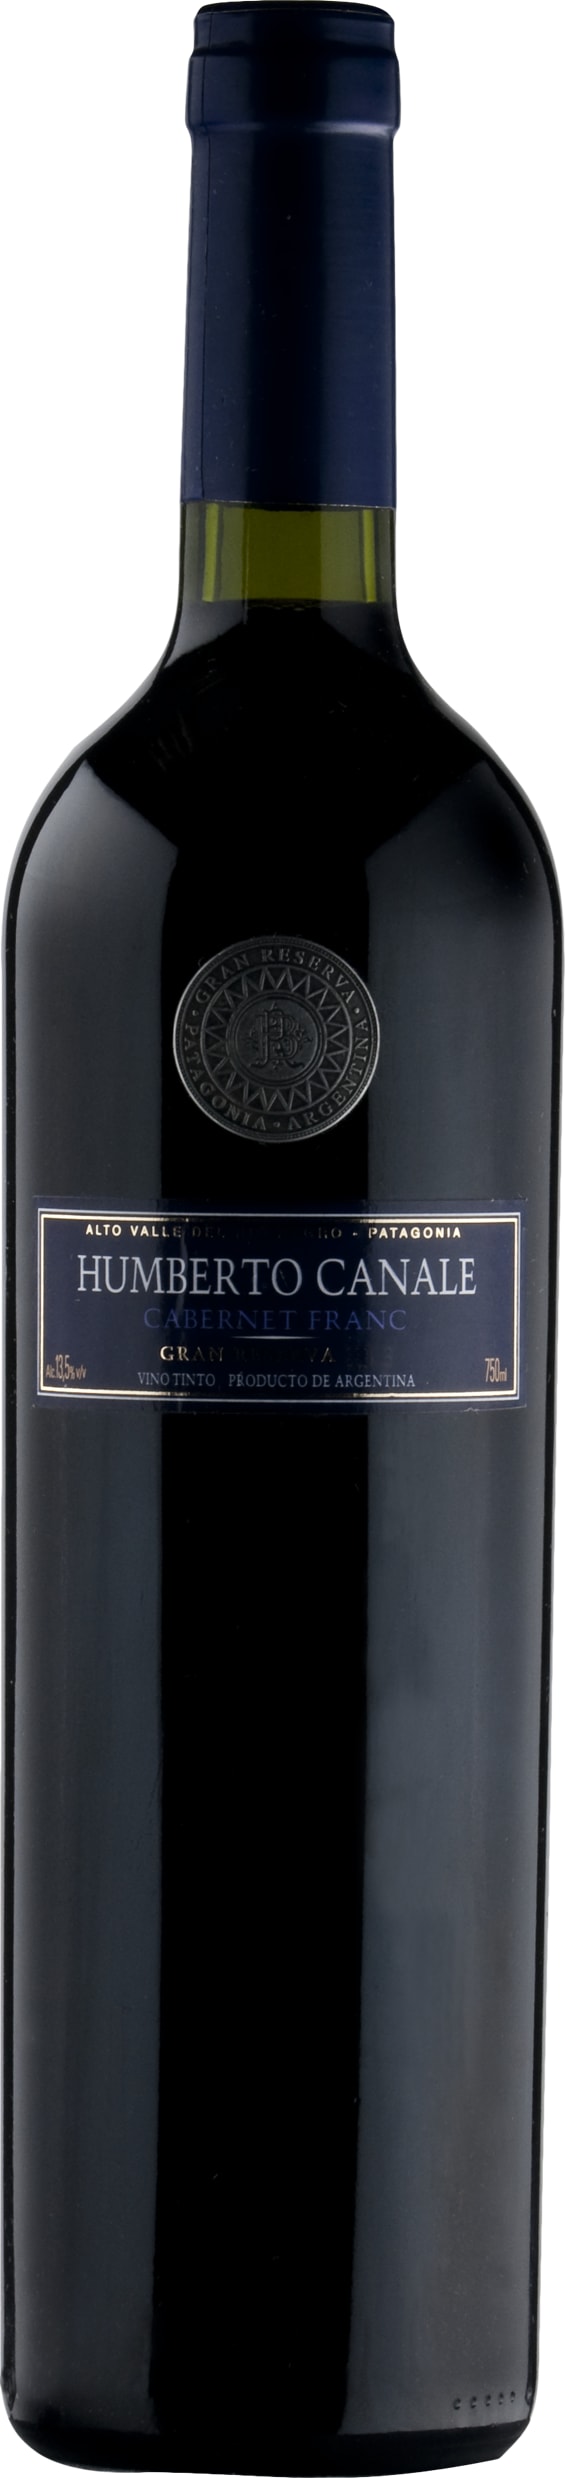 Humberto Canale Seleccion de Familia Cabernet Franc 2020 75cl - Buy Humberto Canale Wines from GREAT WINES DIRECT wine shop